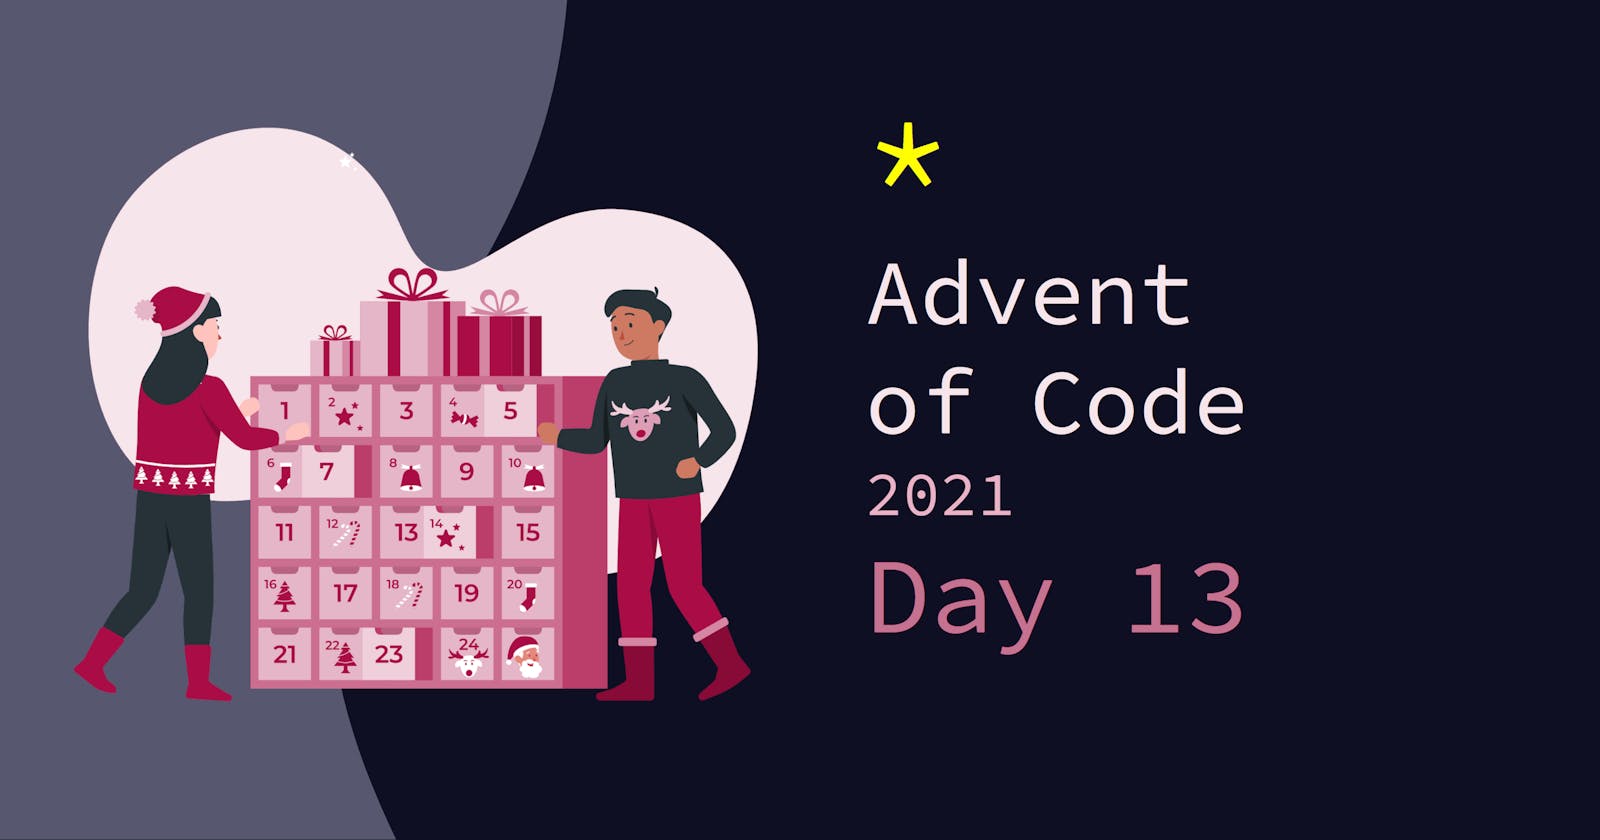 Advent of Code 2021: Day 13